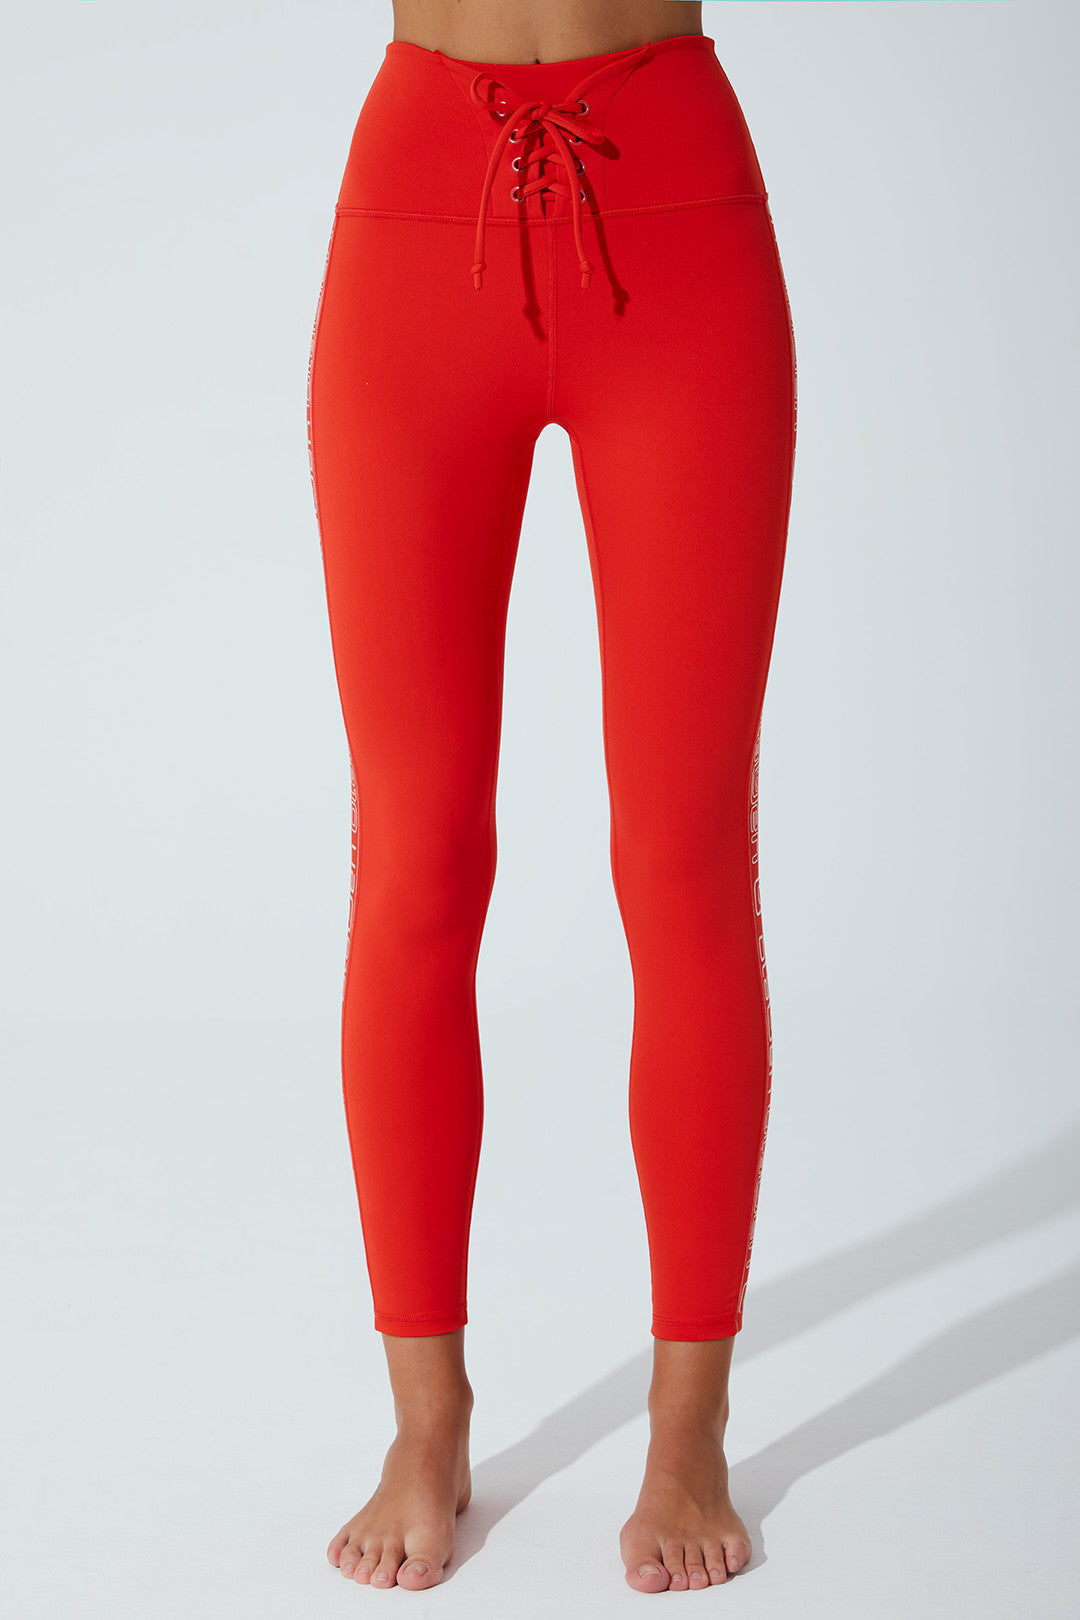 Red high-waist double knot leggings for women, perfect for a stylish and comfortable look.